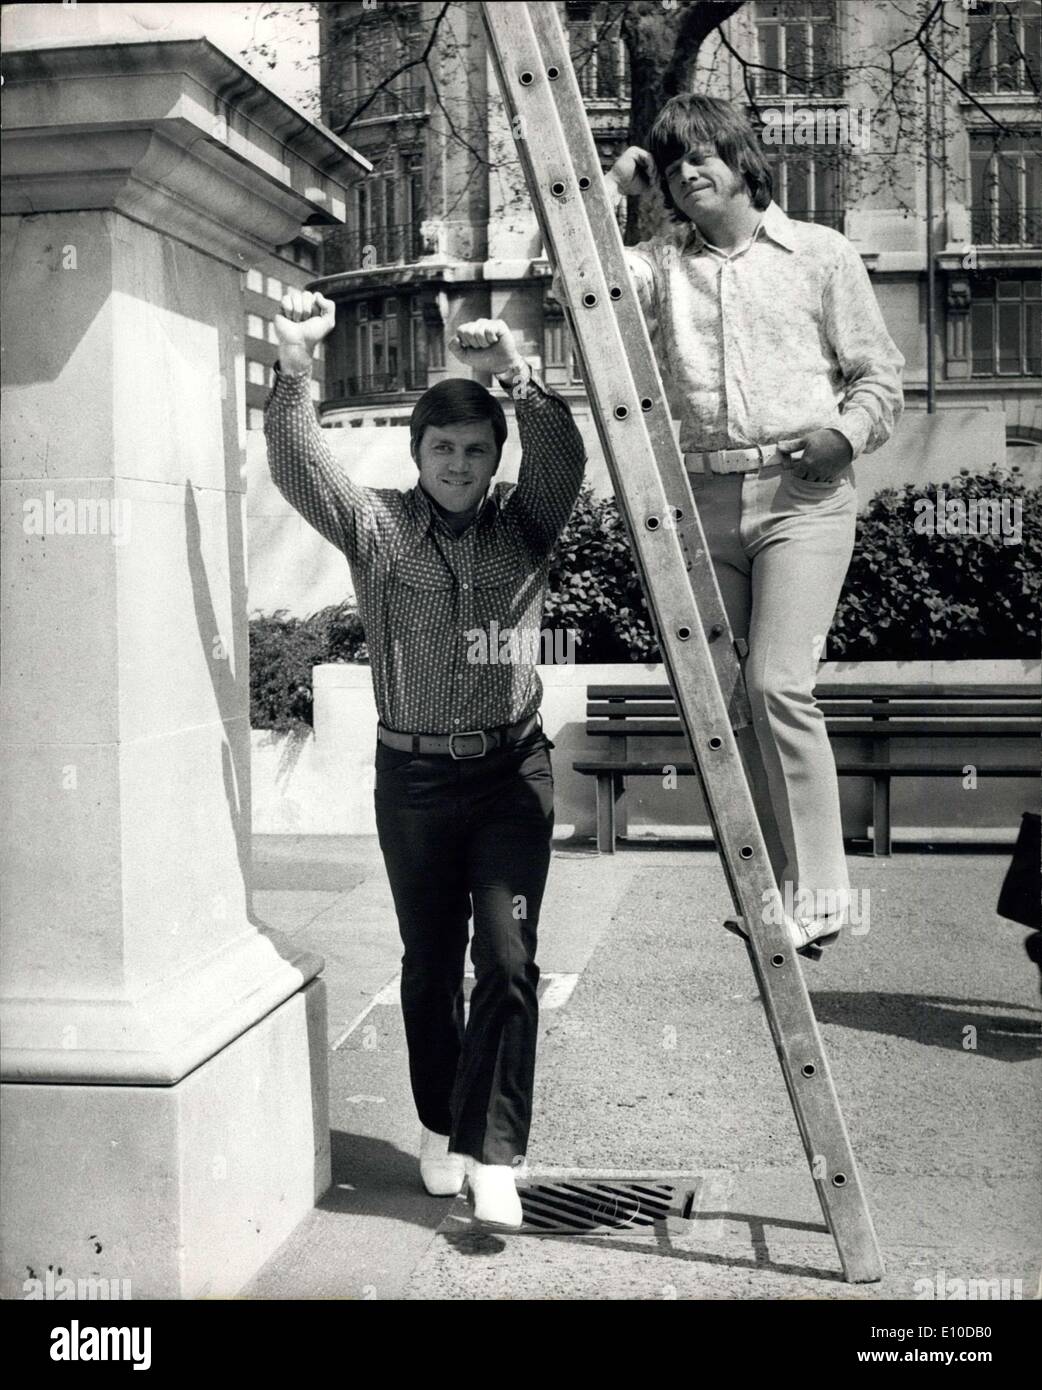 Apr. 25, 1972 - Heavy Weight Jerry Quarry in London:Jerry Quarry, the world rated heavyweight, is in London for his fight against fellow American Larry Middleton at Wembley on May 9th. Photo Shows Jerry Quarry proves he's not superstitious by running under a ladder watched by his brother JIM, who is also his assistant trainer in London today. Stock Photo